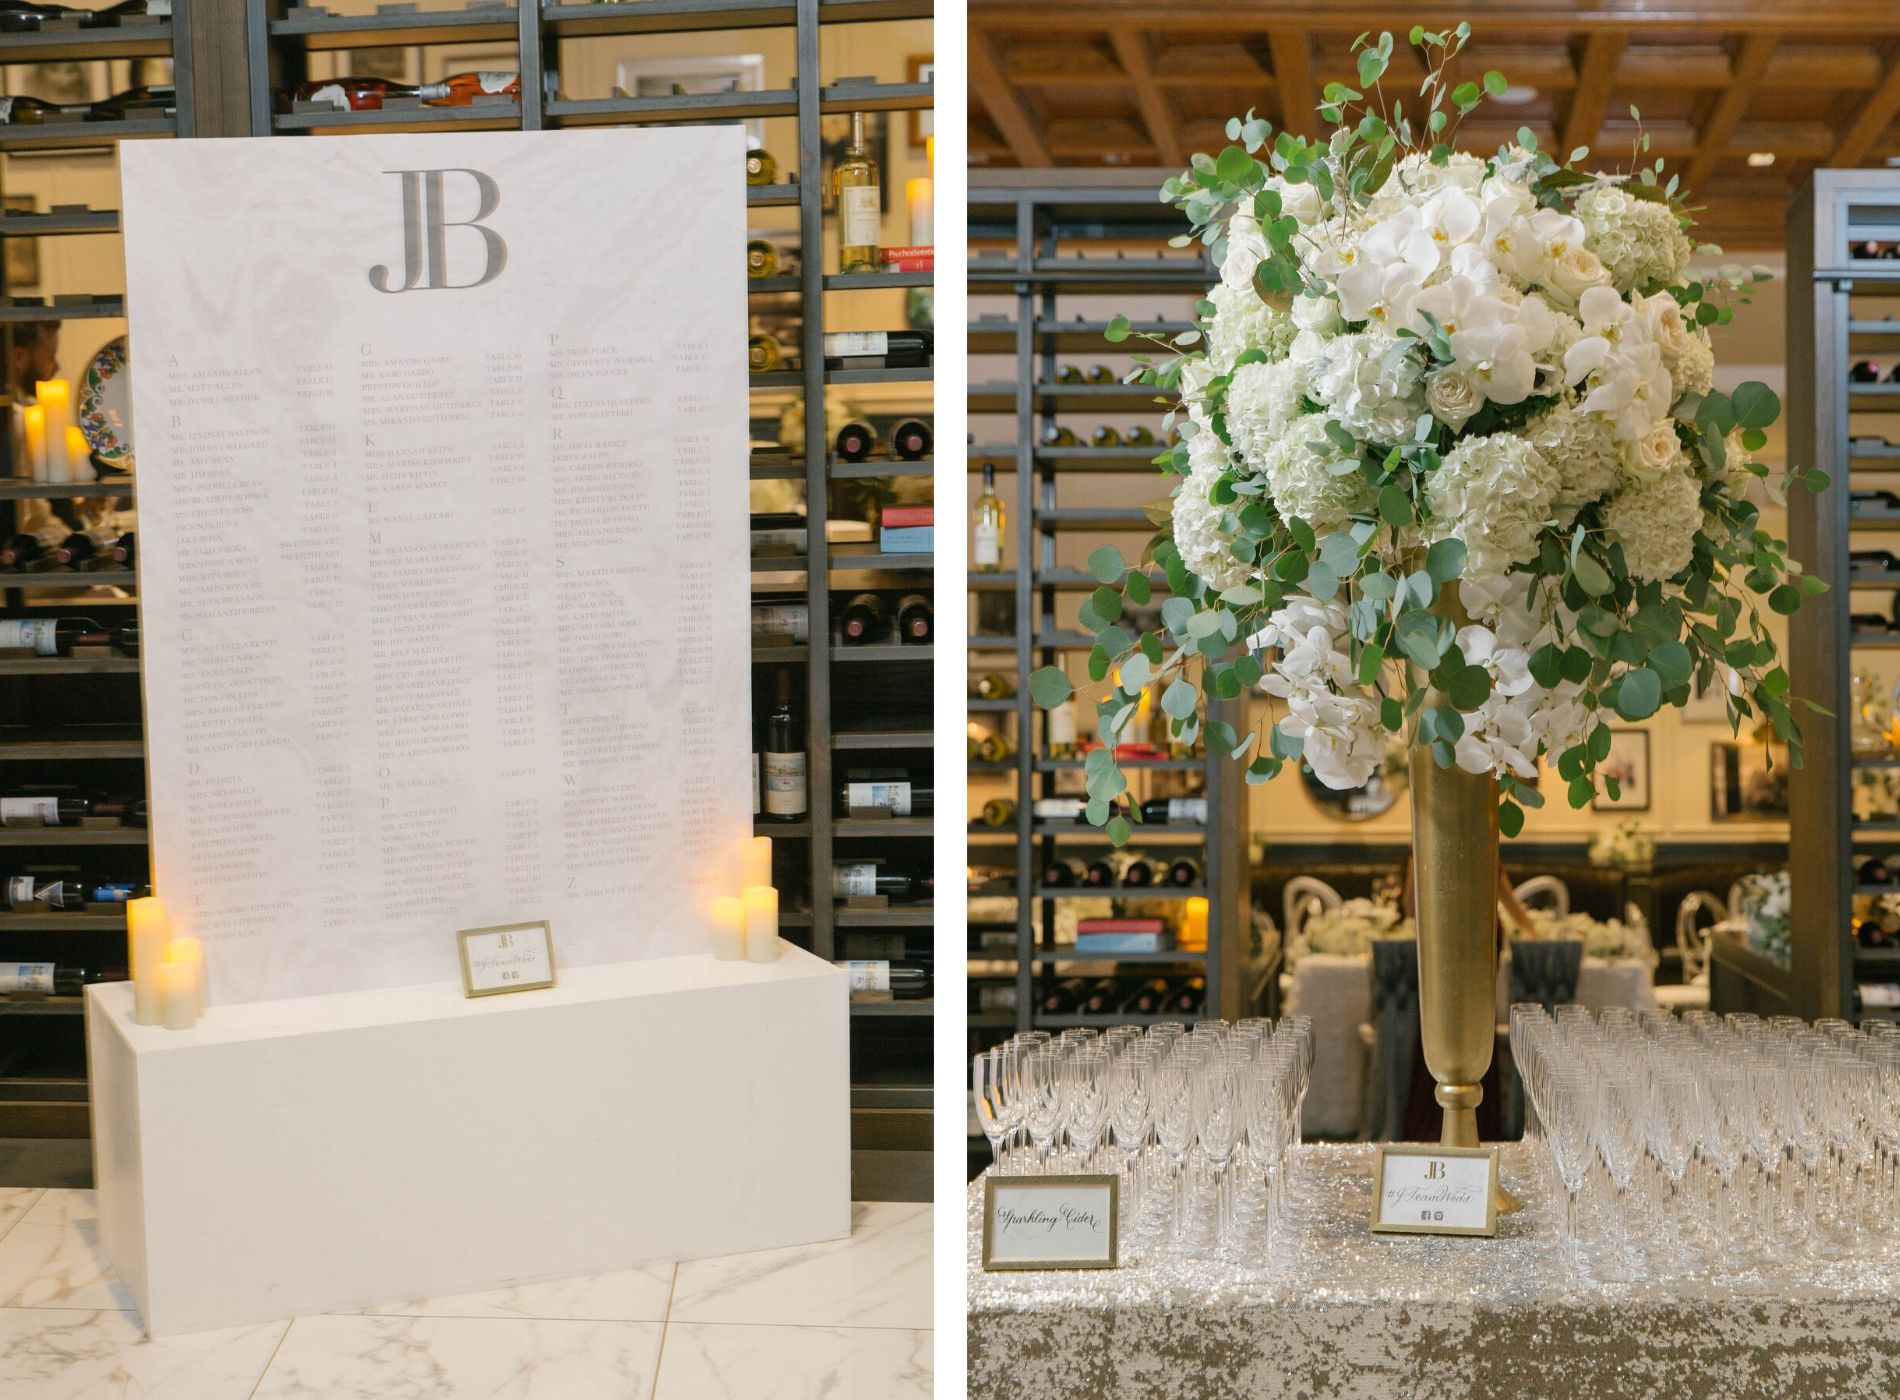 Elegant Classic Wedding Reception Decor, Large White Custom Seating Chart on Pedestal, Tall Gold Vase with White Orchids, Hydrangeas and Eucalyptus Floral Arrangement on Champagne Glass Welcome Table | Tampa Wedding Planner Parties A'la Carte | Wedding Rentals Over the Top Rental Linens